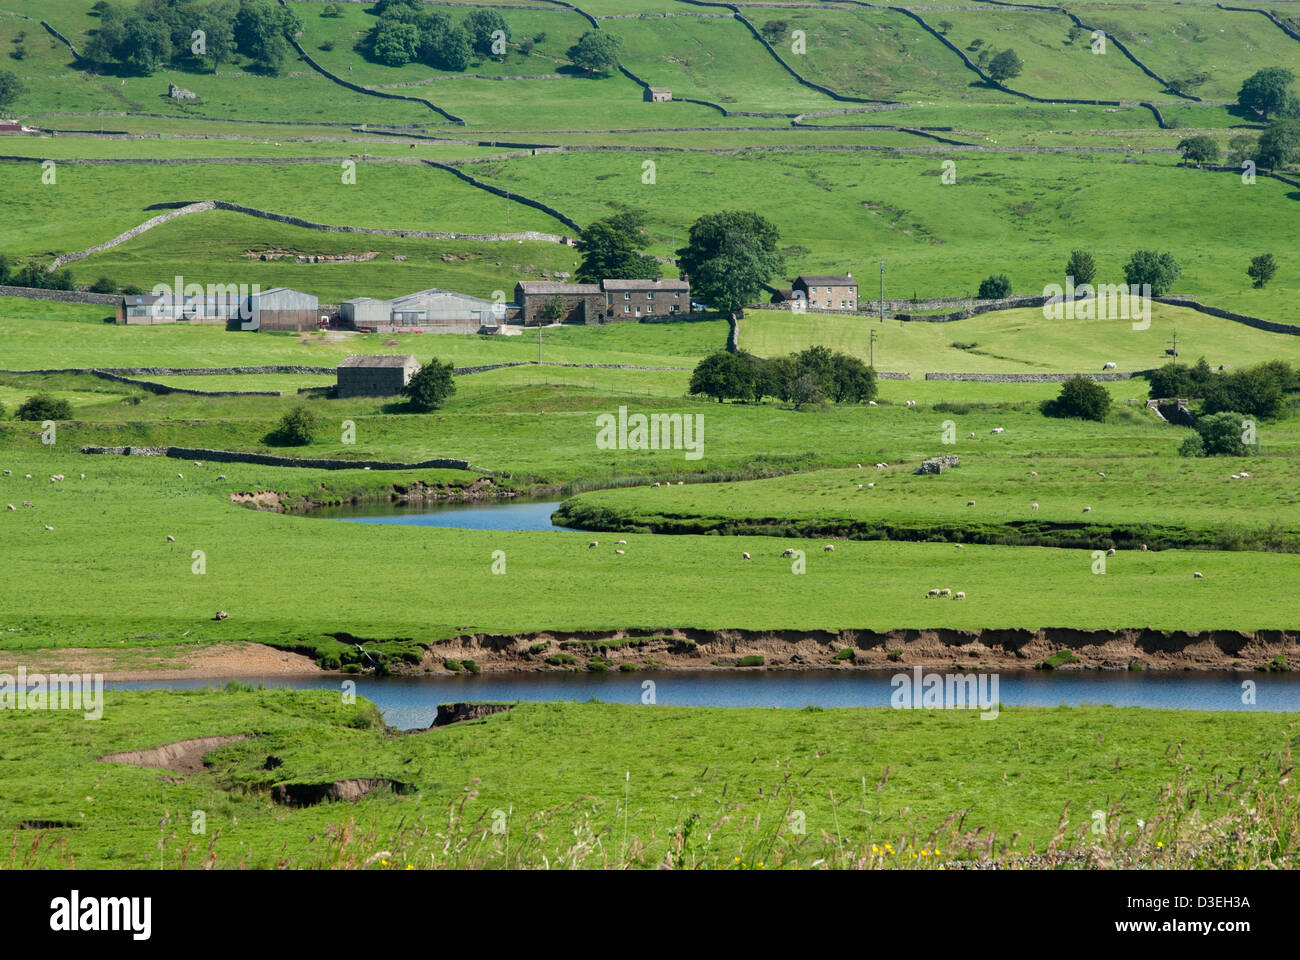 River Ure winding through farmland near Hawes in Wensleydale, Yorkshire Dales National Park, England Stock Photo